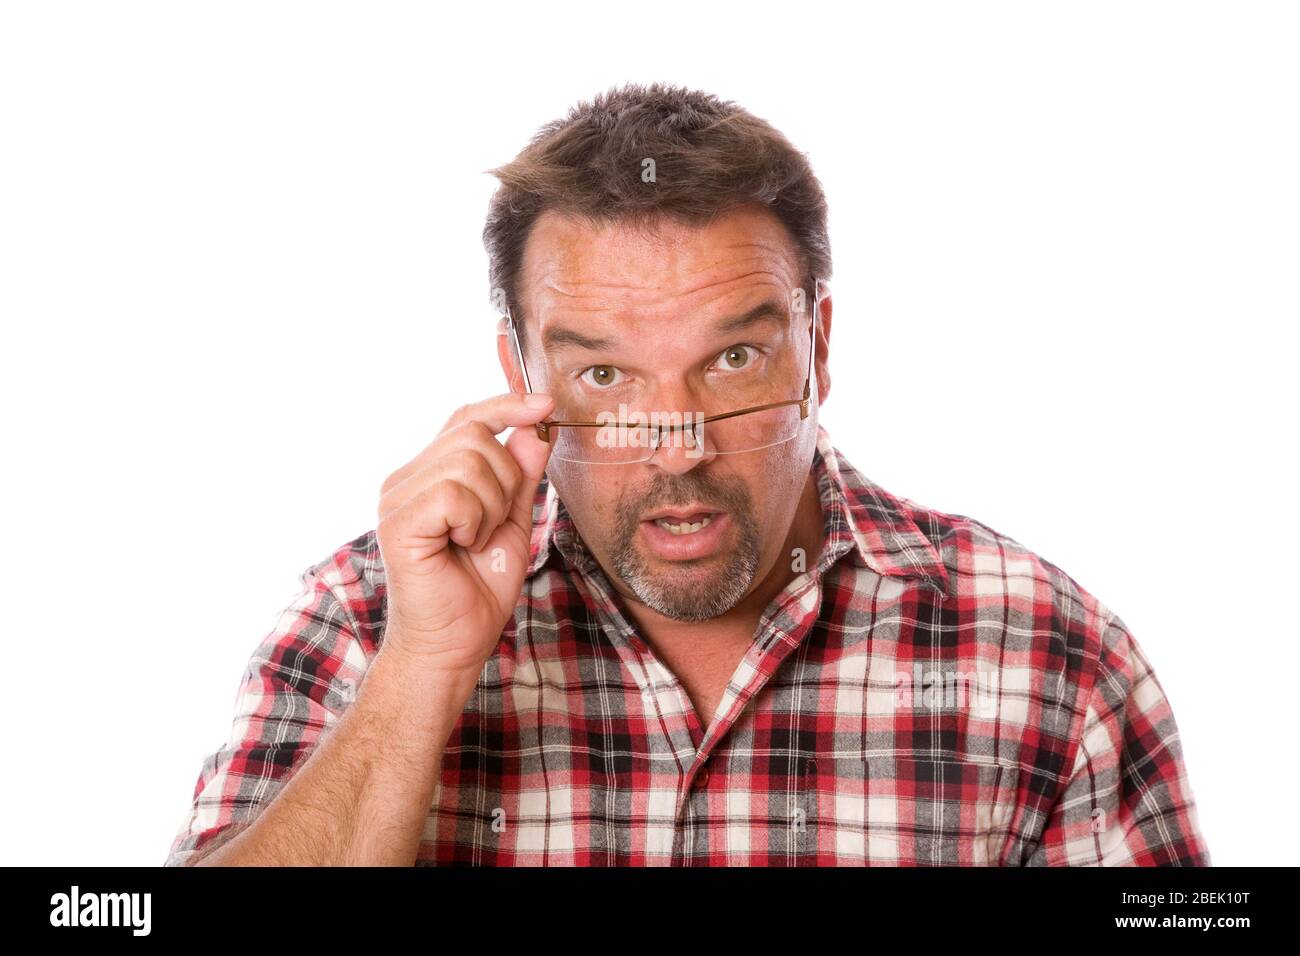 A guy in his forties looking over his eyeglasses Stock Photo